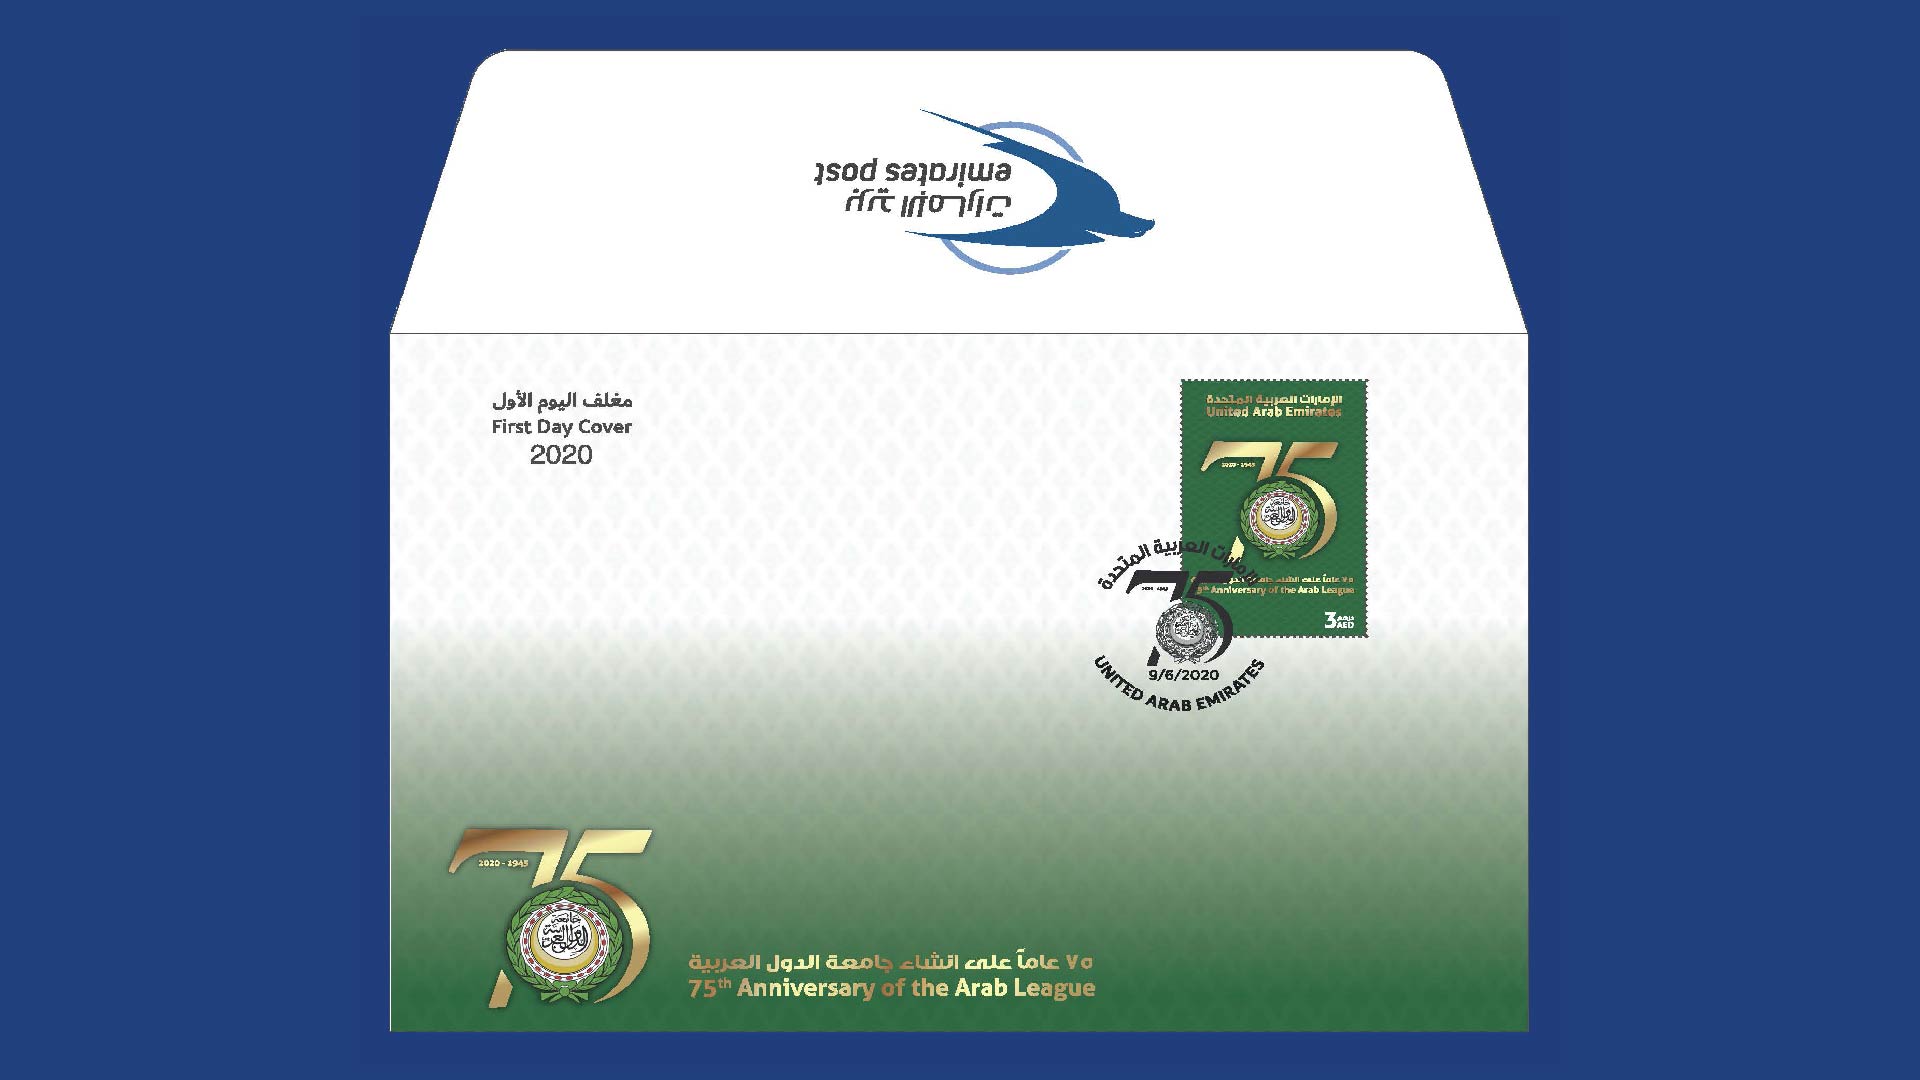 th Anniversary of the Arab League FDC